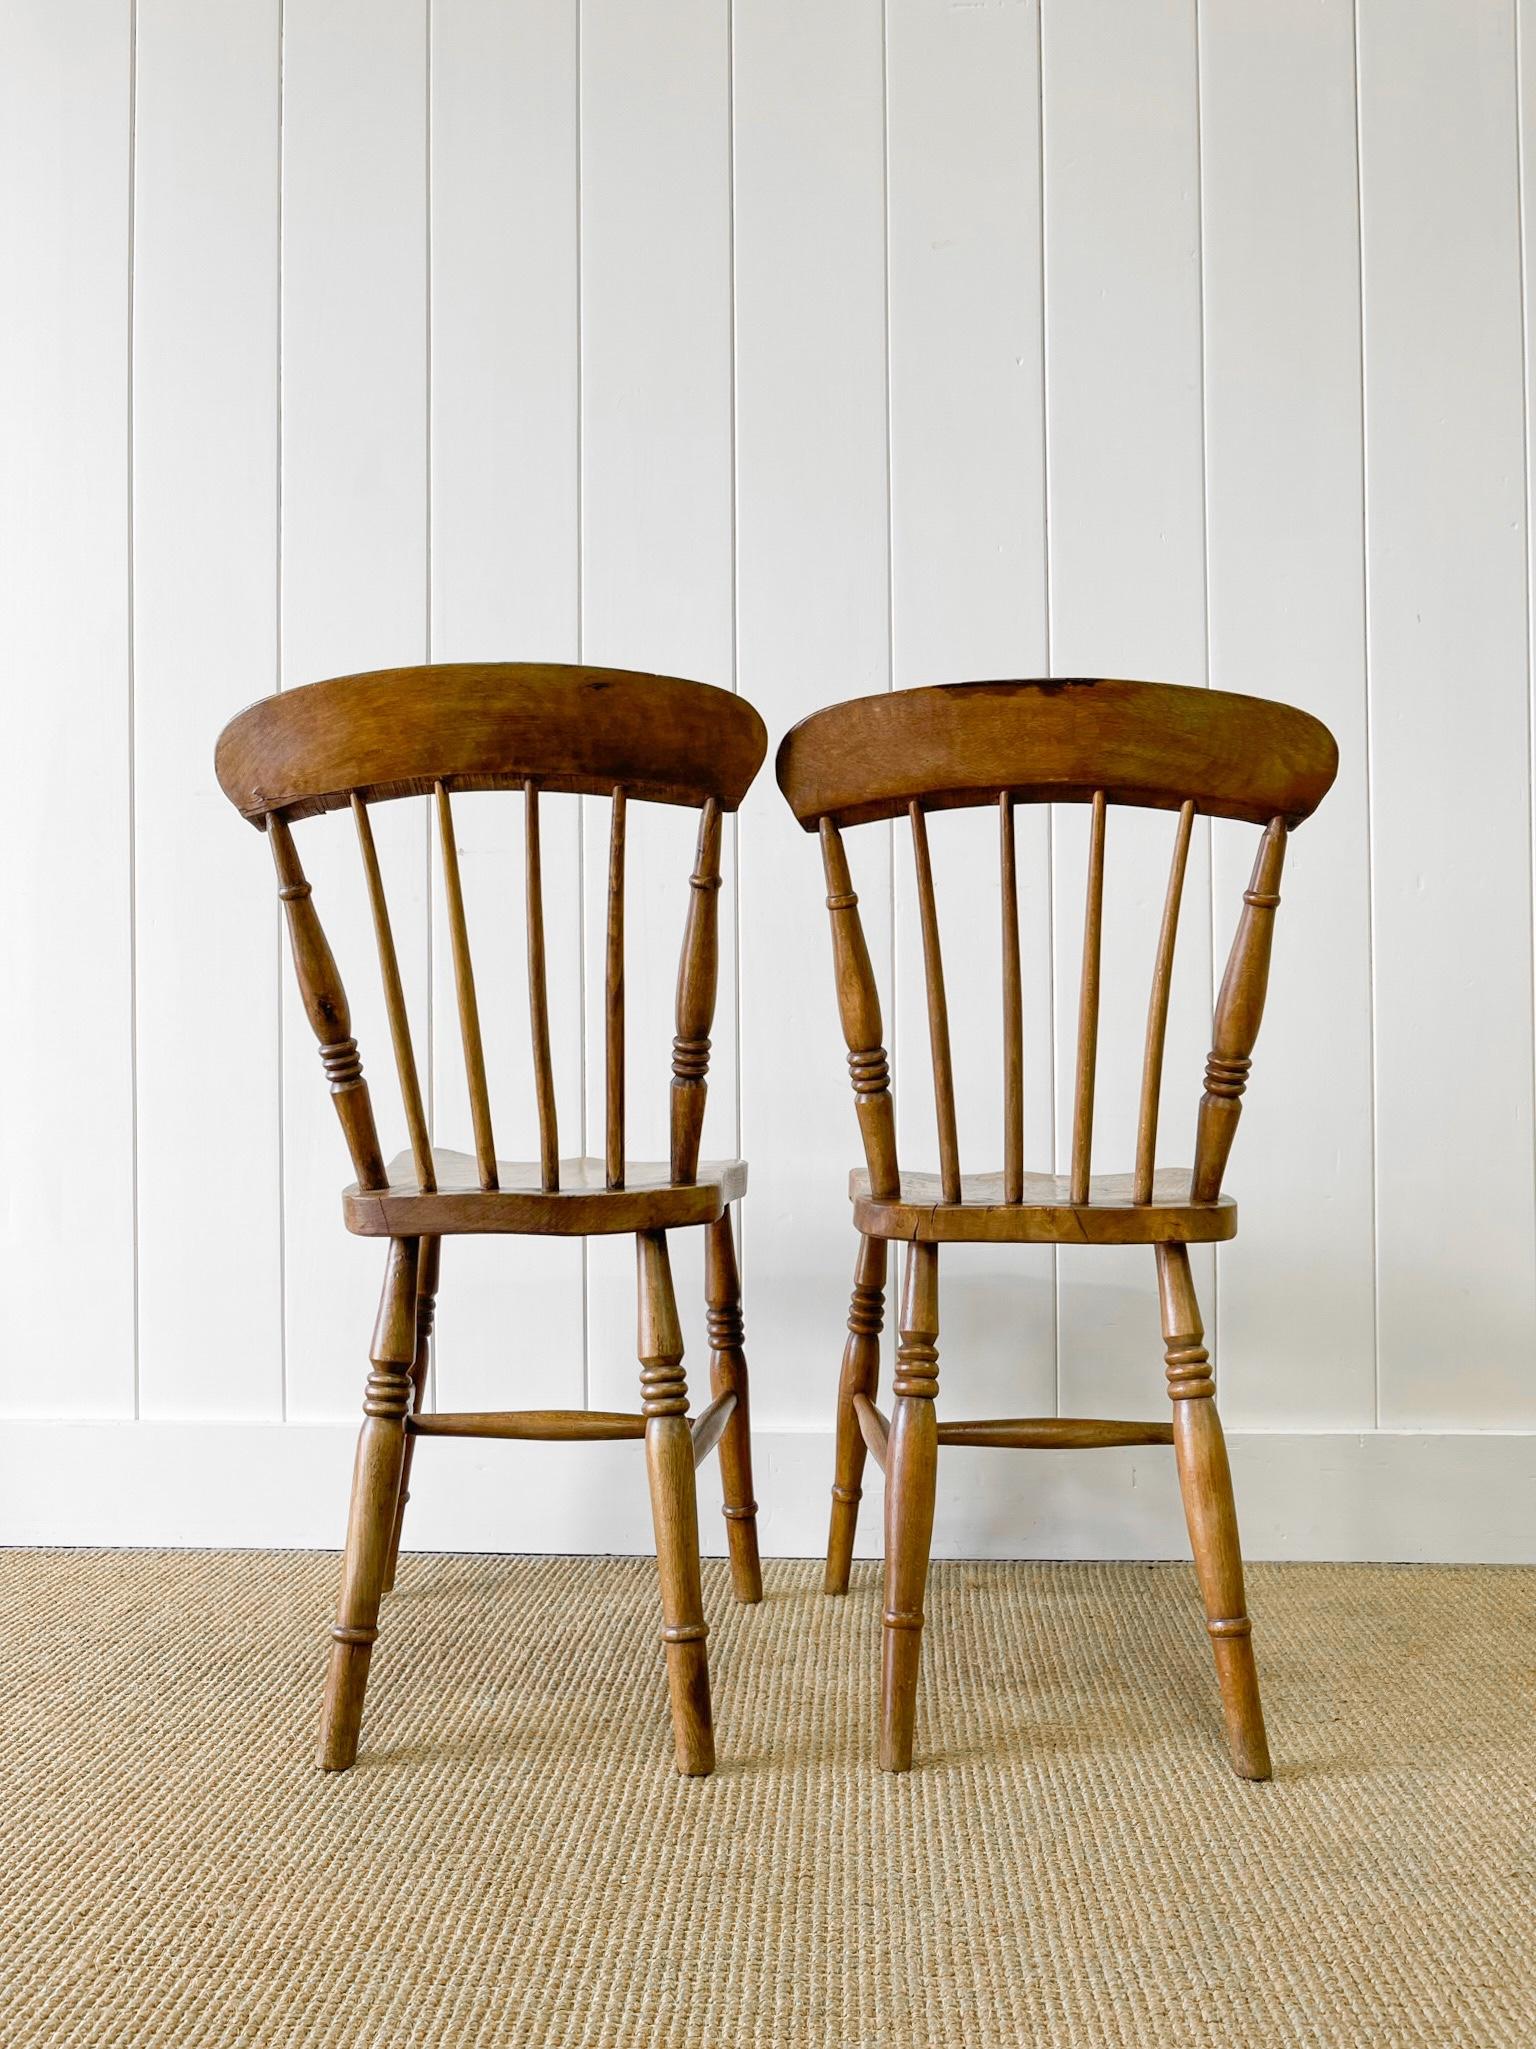 An Antique Set of 4 Early 19th Century Stick Back Chairs For Sale 13